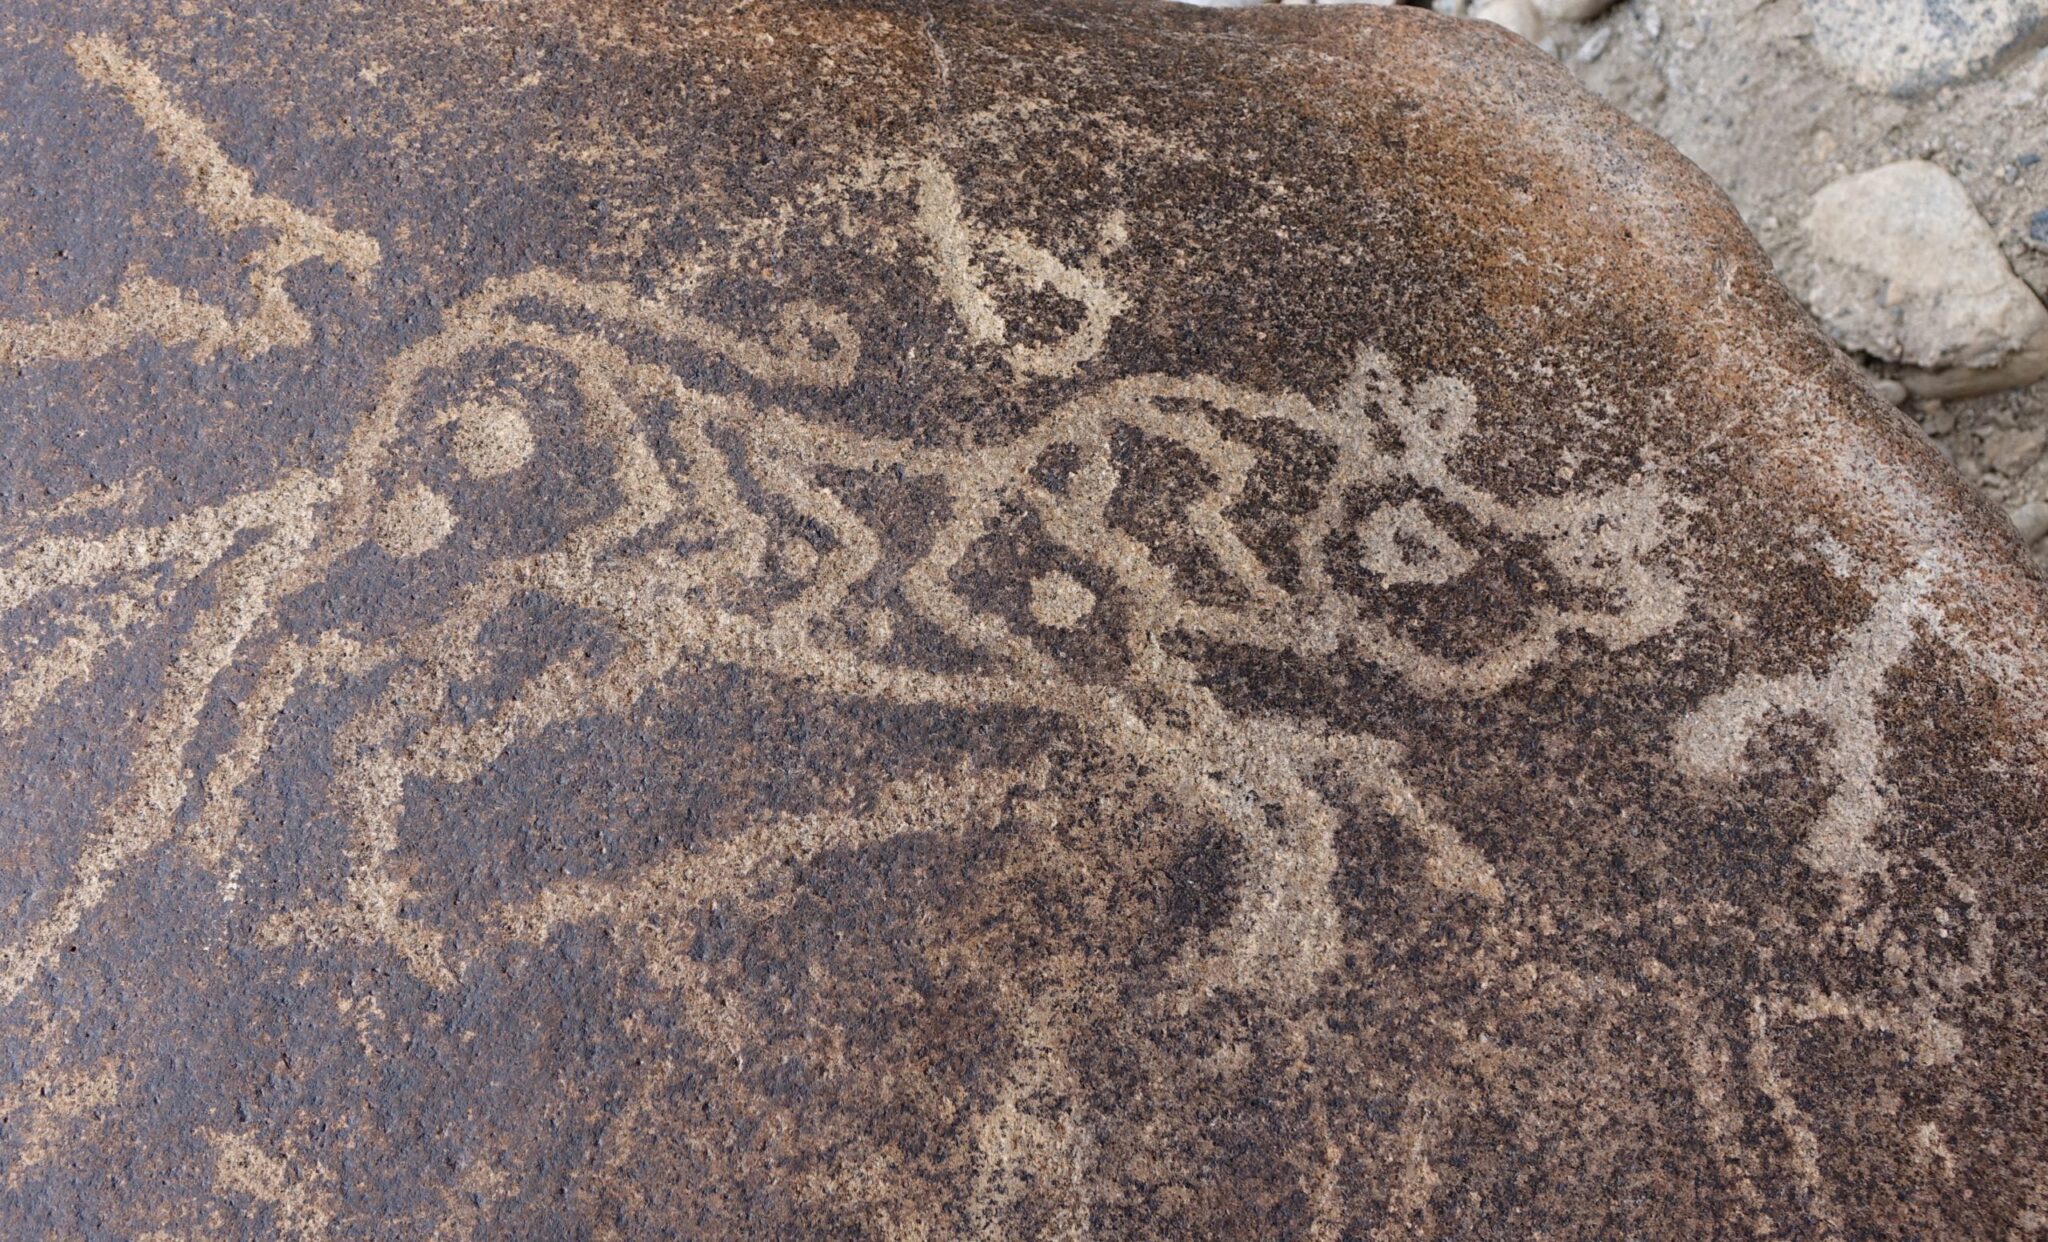 Depiction of animal decorated with geometric forms carved onto craggy brown boulder